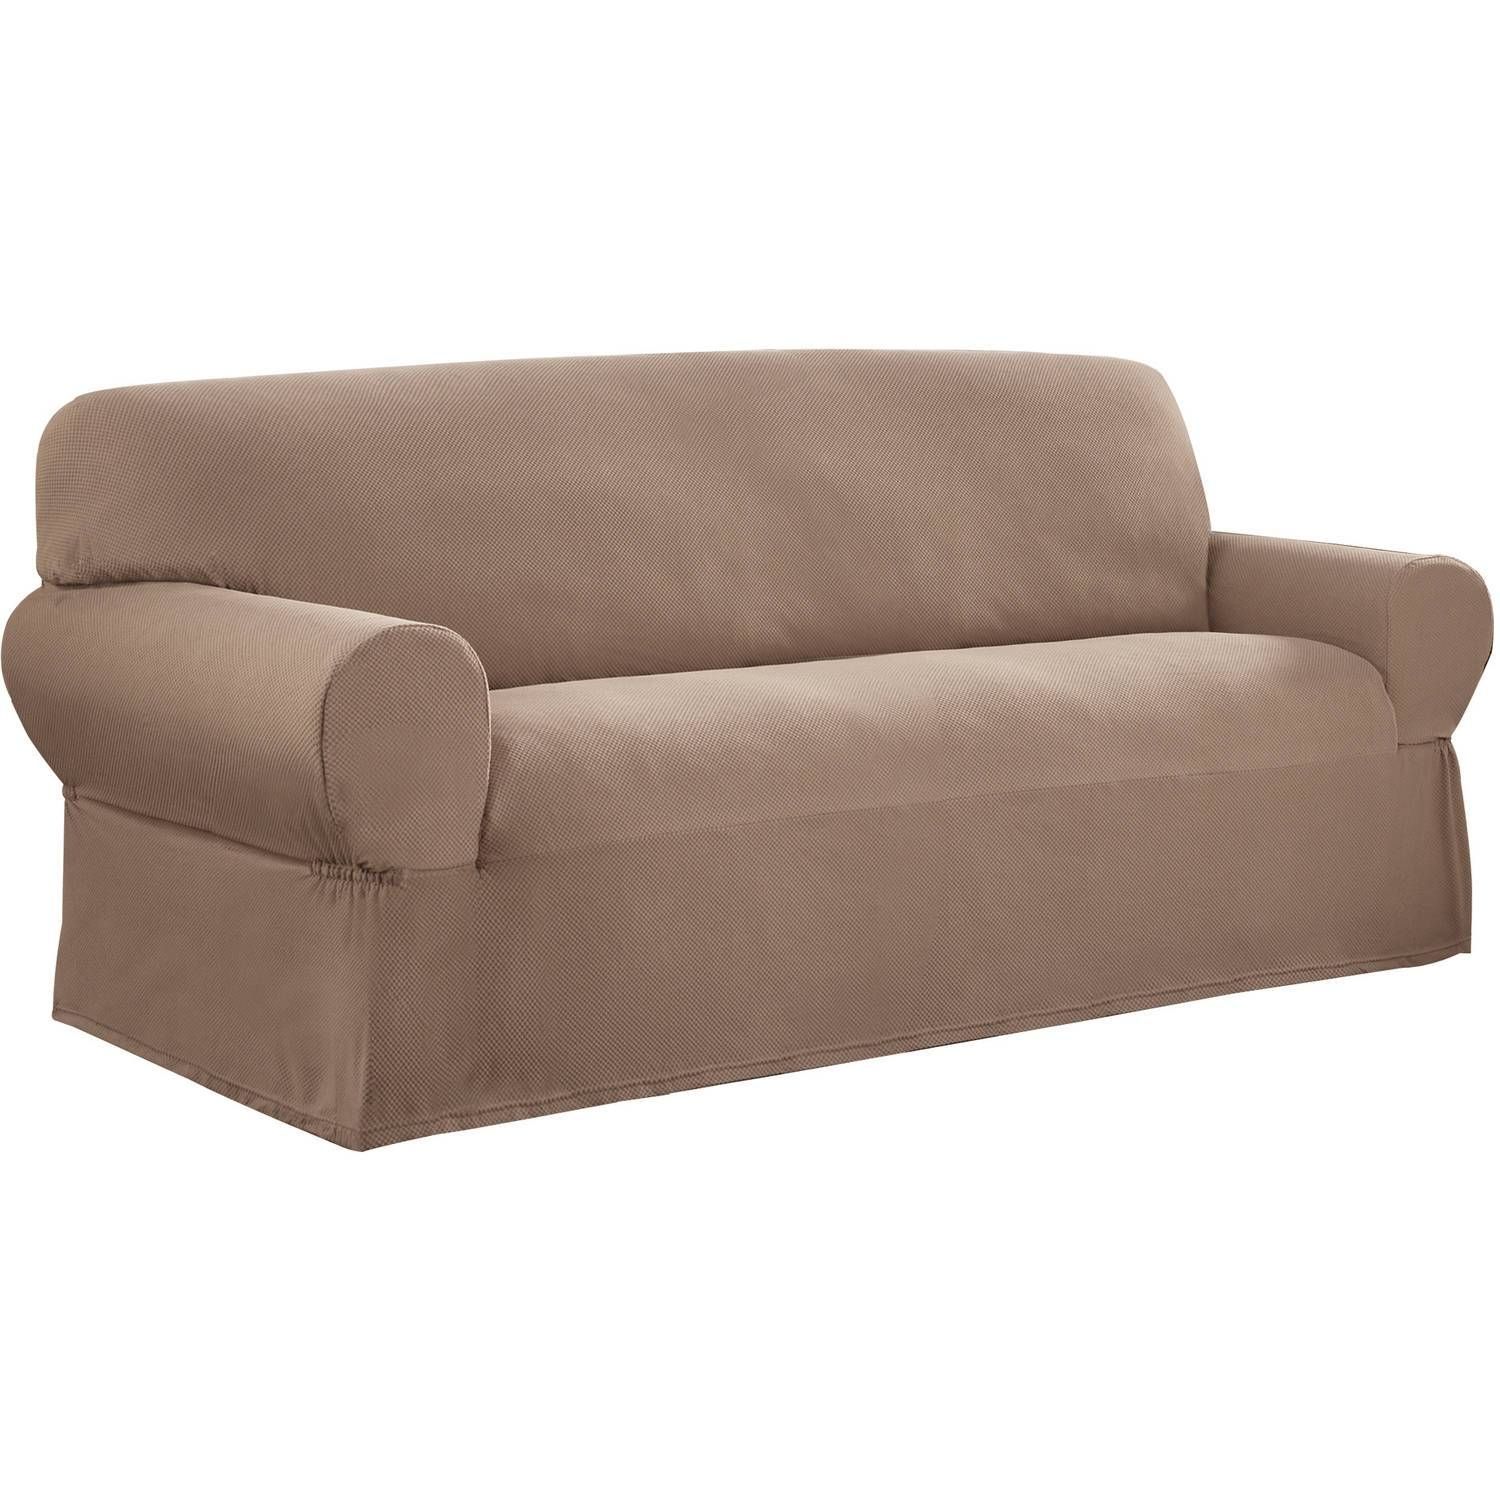 Mainstays 1 Piece Stretch Fabric Sofa Slipcover – Walmart Within Stretch Slipcovers For Sofas (View 3 of 15)